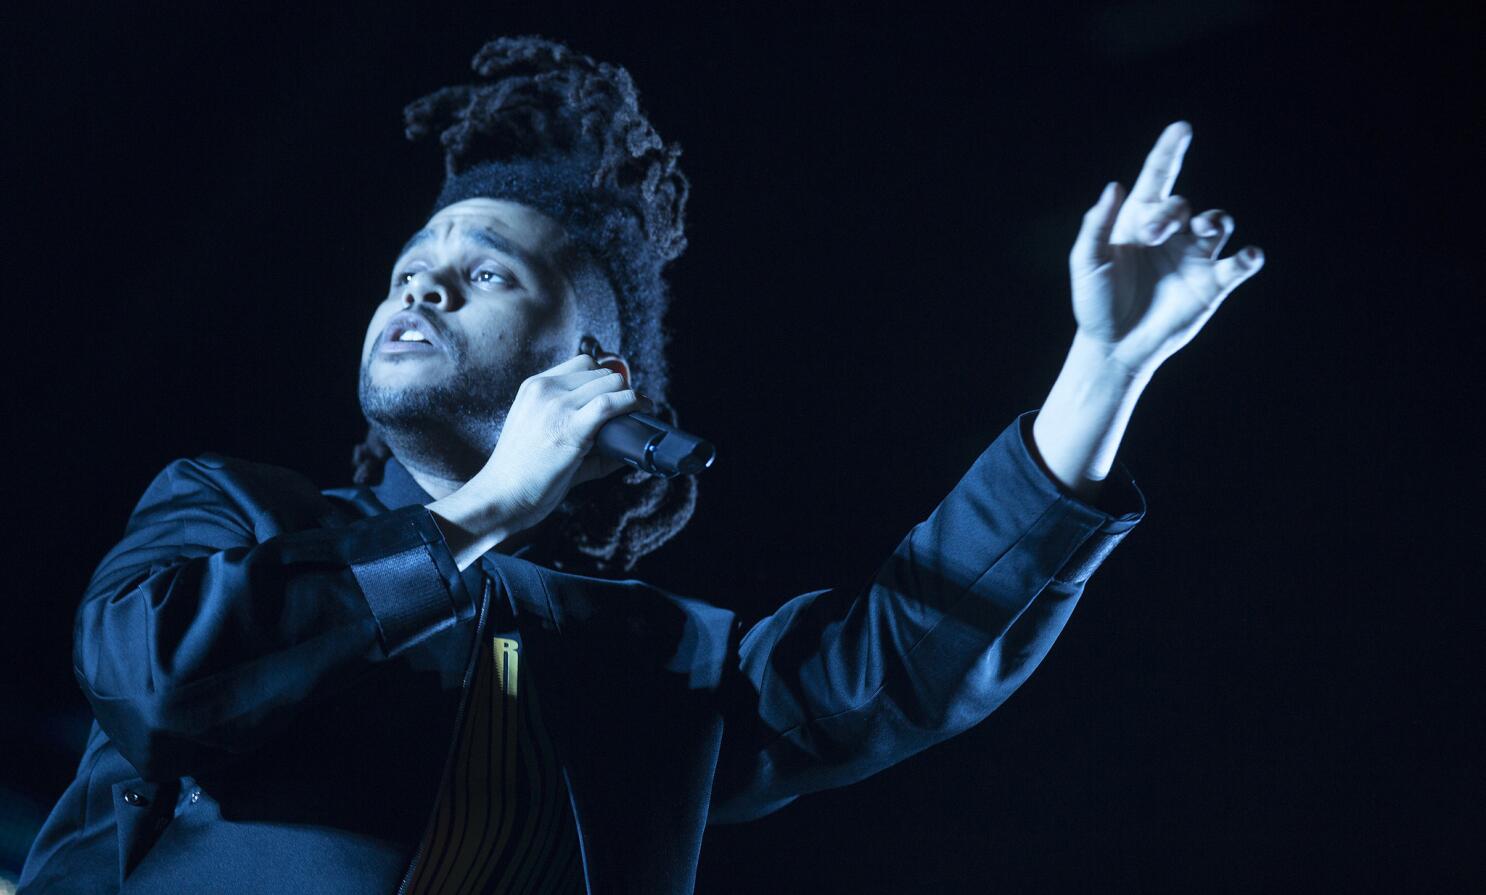 Artistic Entertainment Services - Project: The Weeknd at Coachella